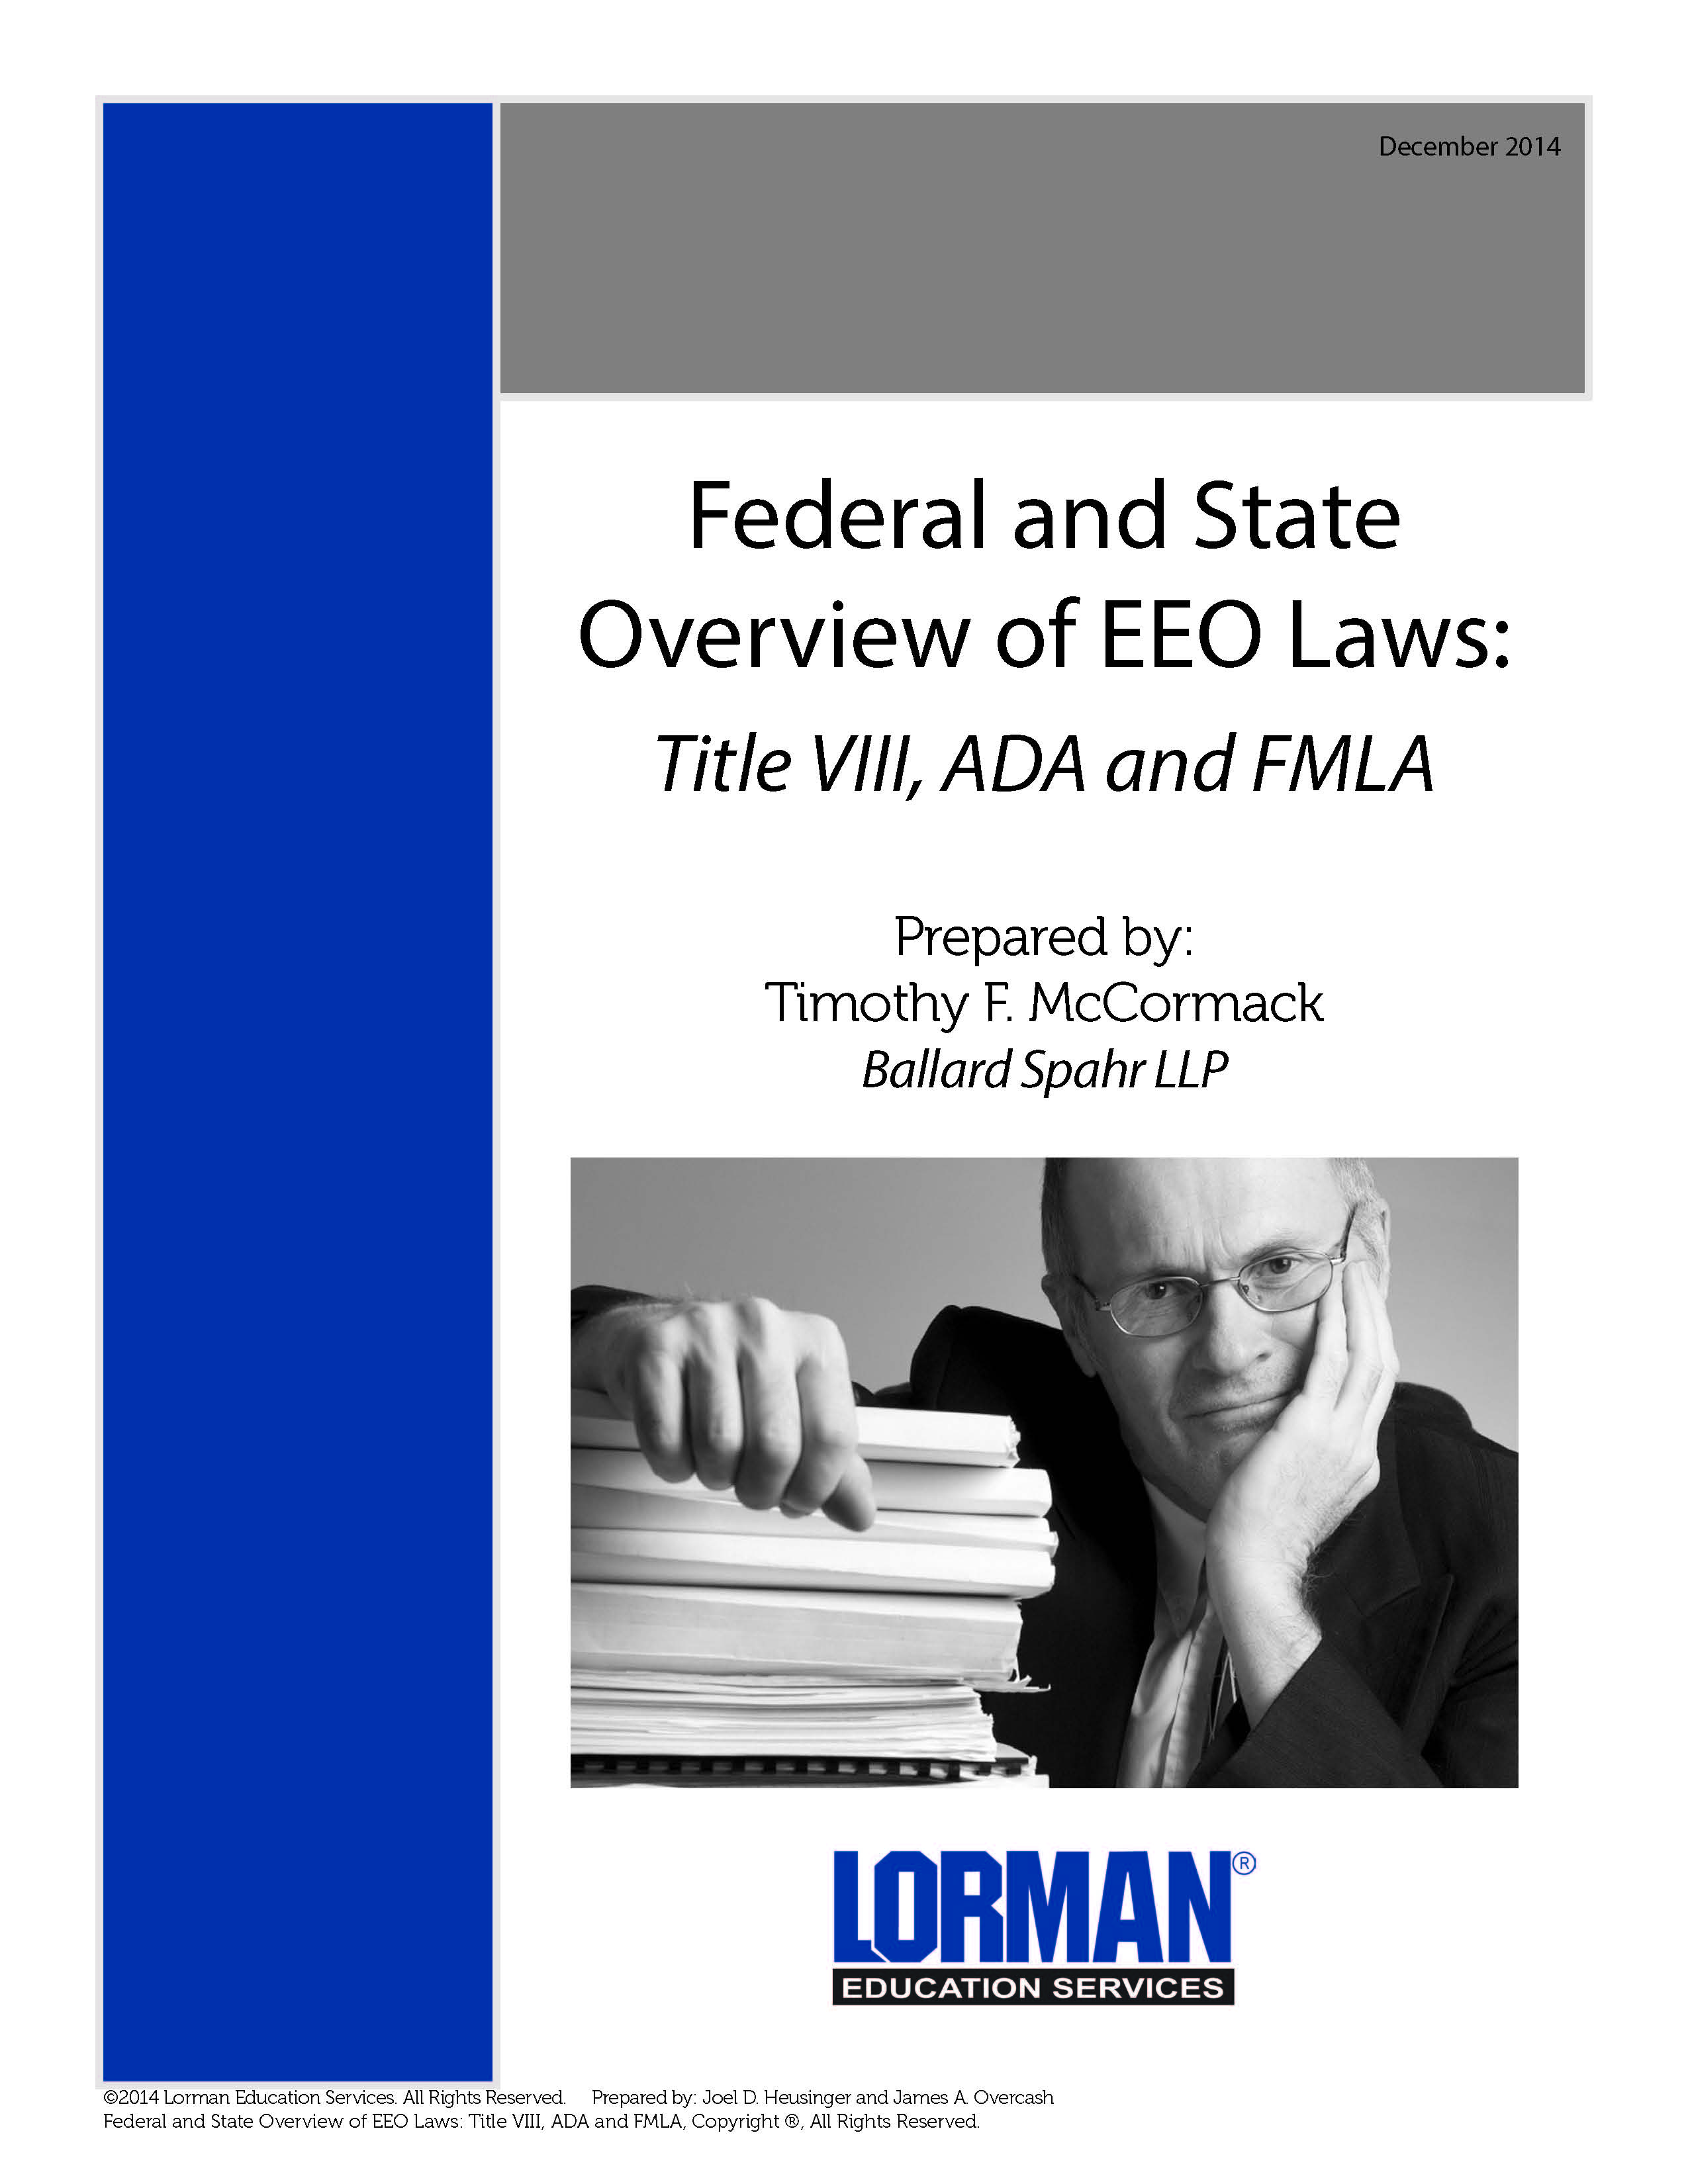 Federal and State Overview of EEO Laws: Title VIII, ADA and FMLA